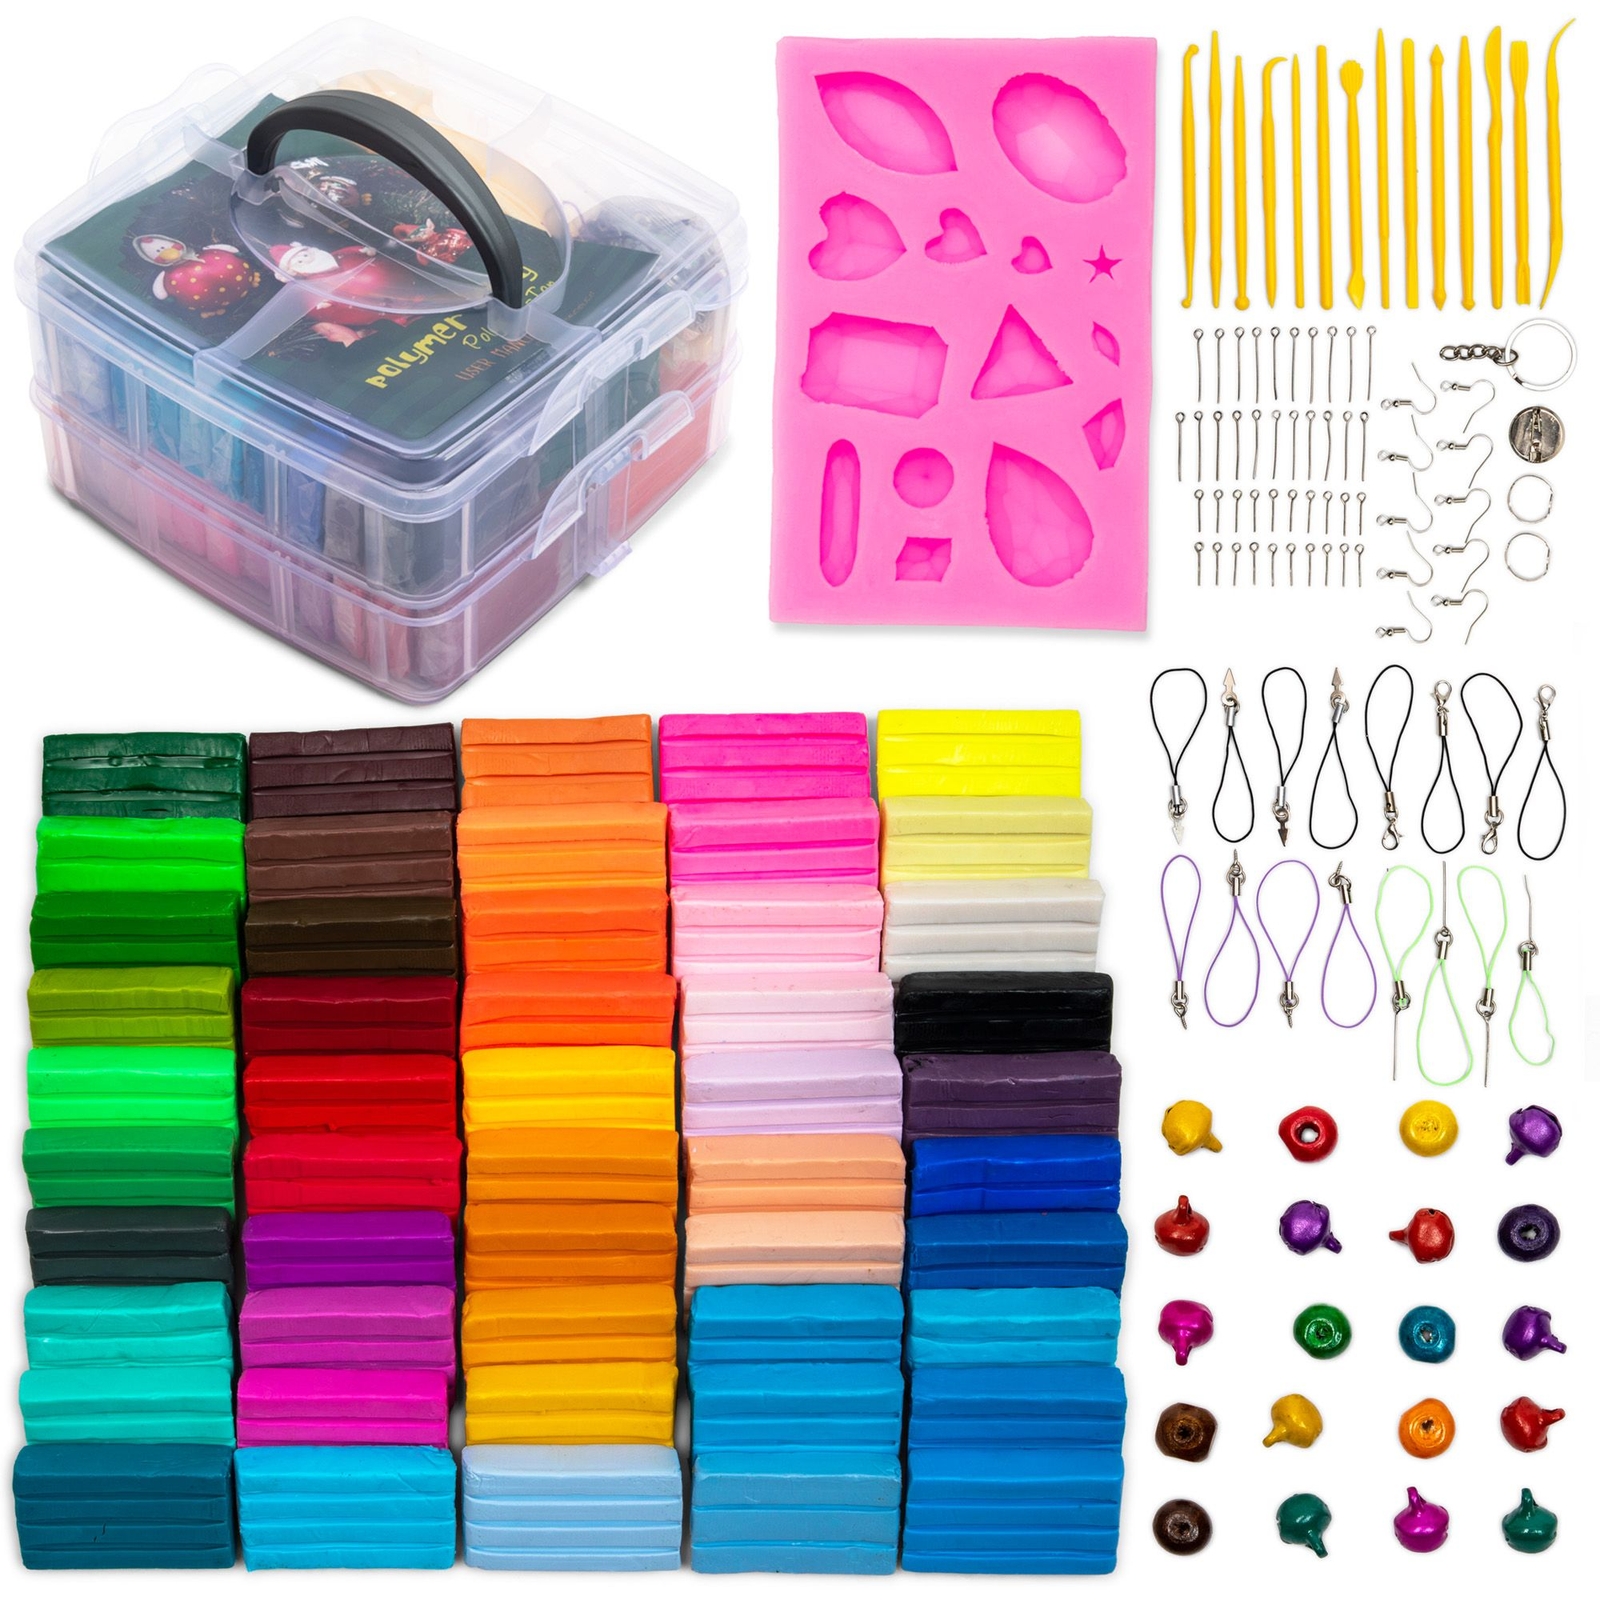 79 Piece Polymer Clay Starter Kit, Oven Bake Modeling Clay with Sculpting  Tools, Earring Making Kit, 50 Colors